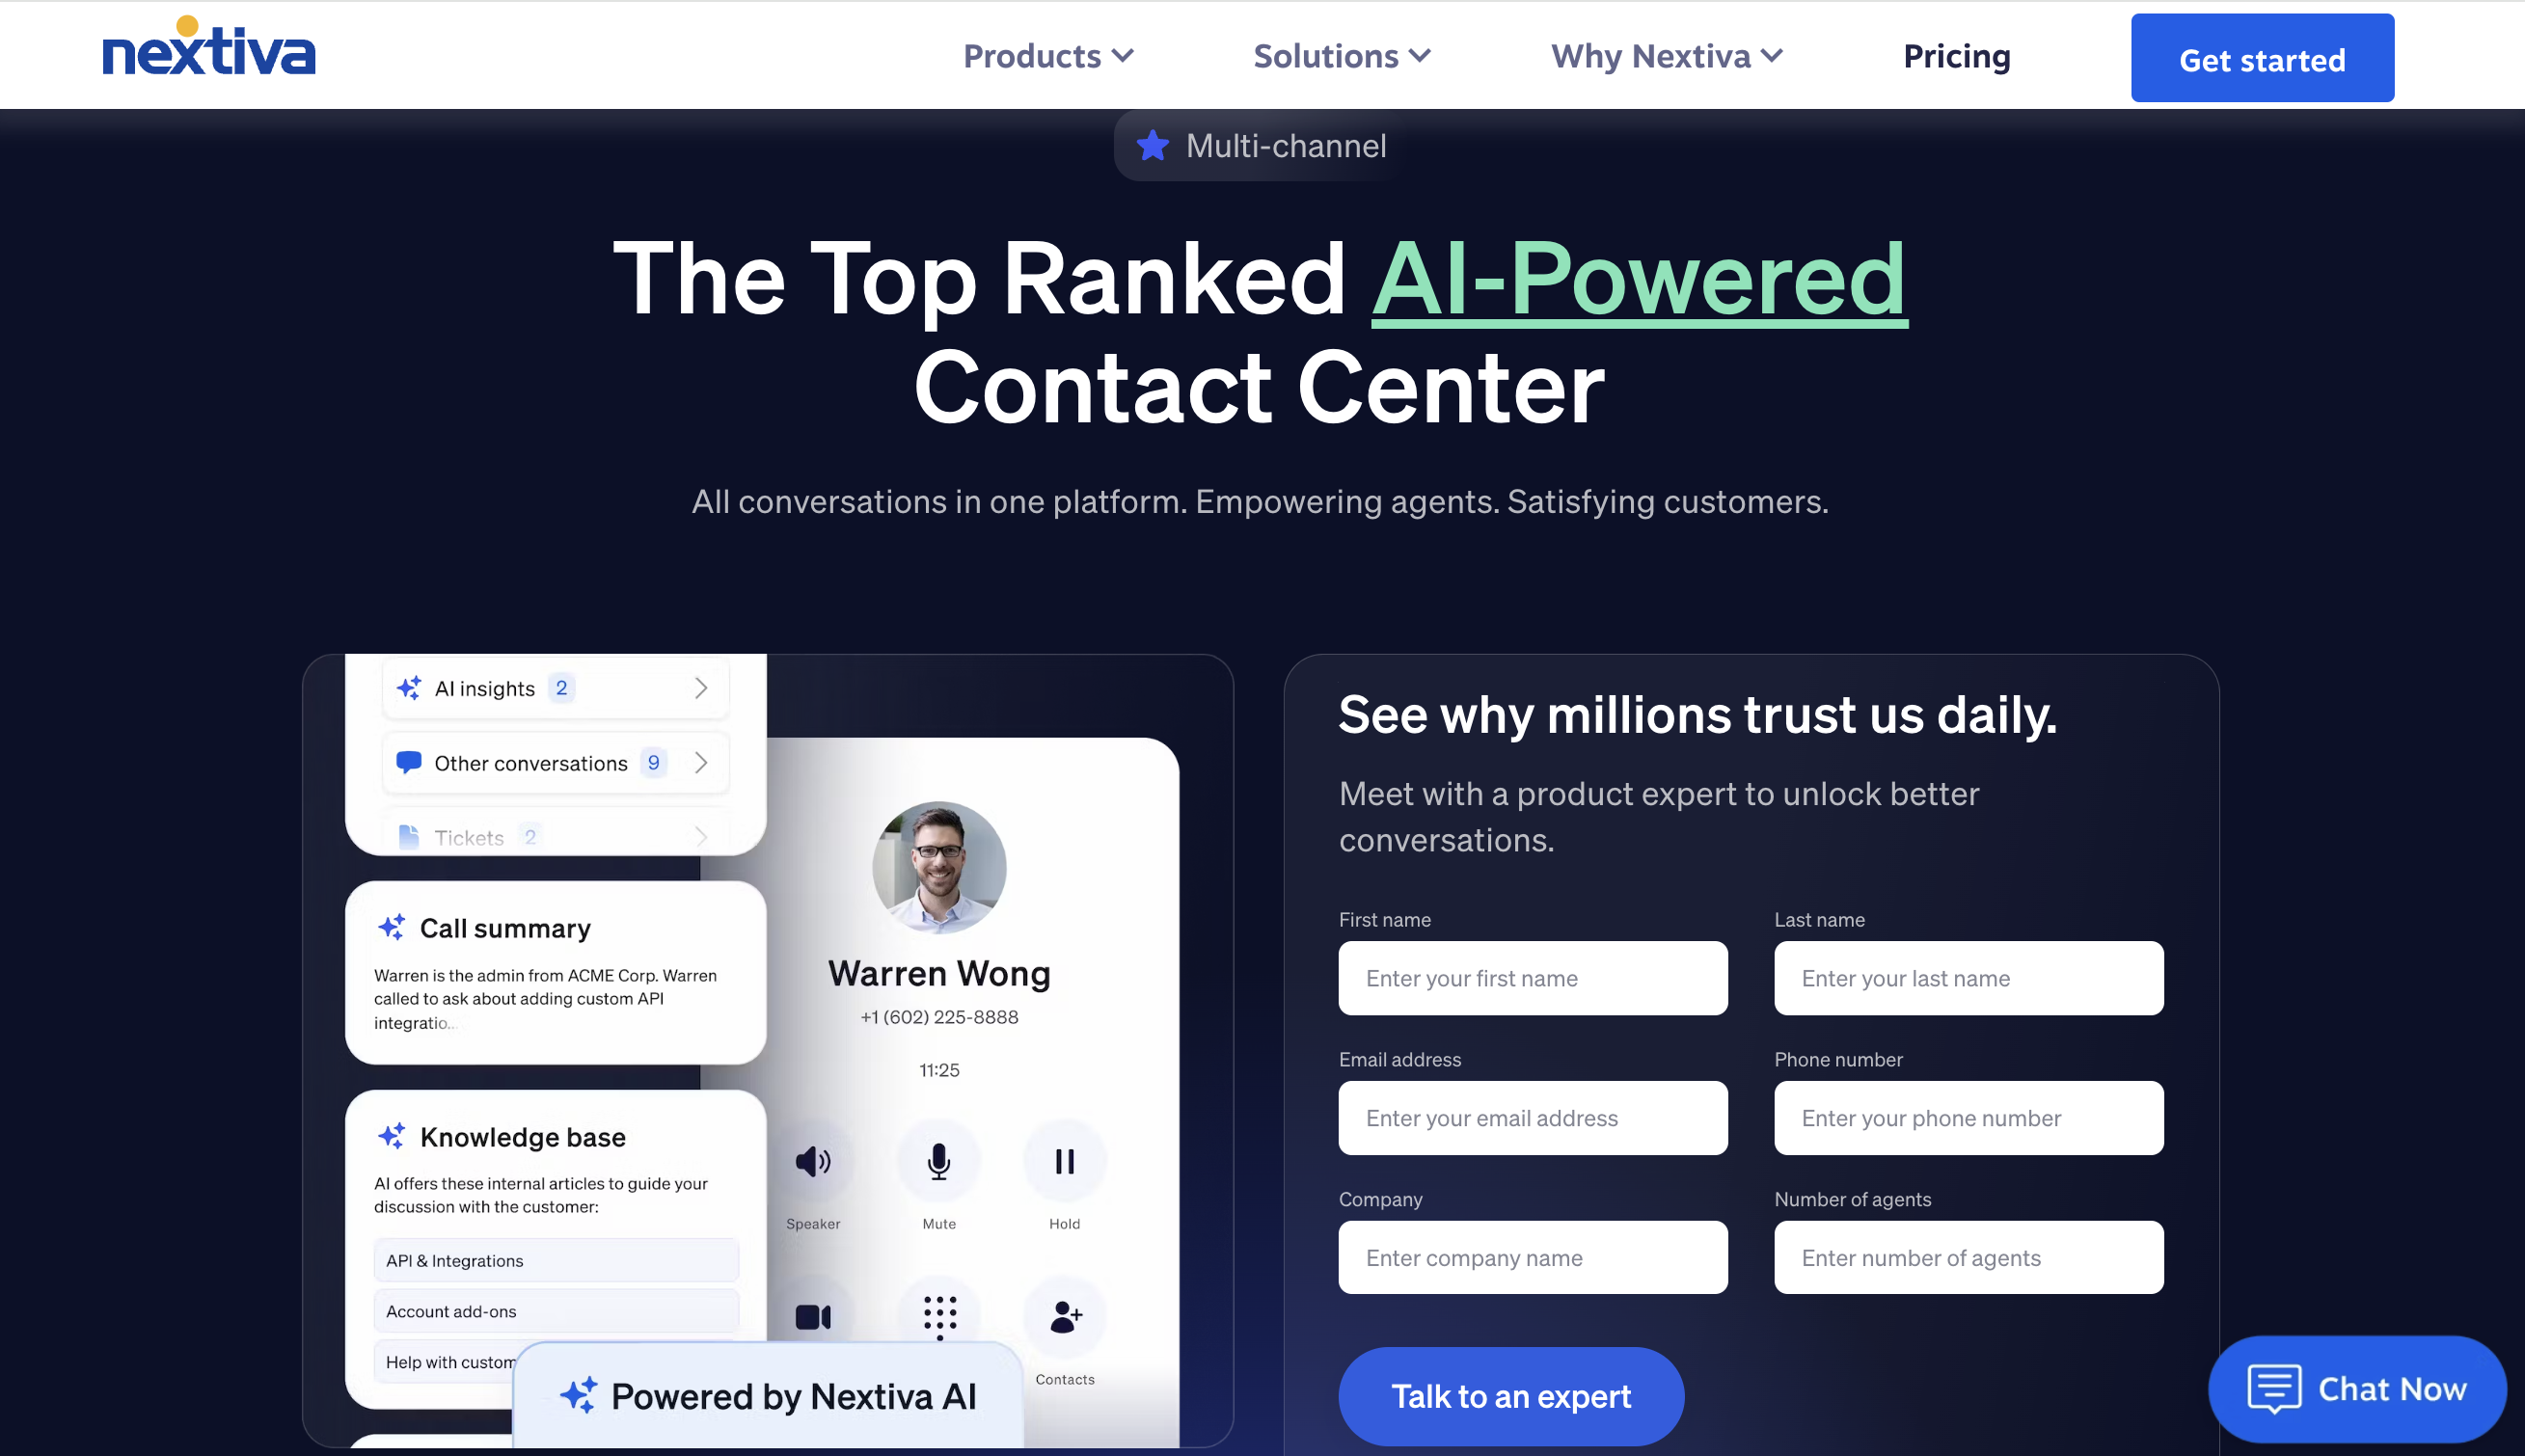 Nextiva-acquired-leading-contact-center-platform-Thrio-to-bring-AI-powered-contact-center-functionality-to-its-offering-1